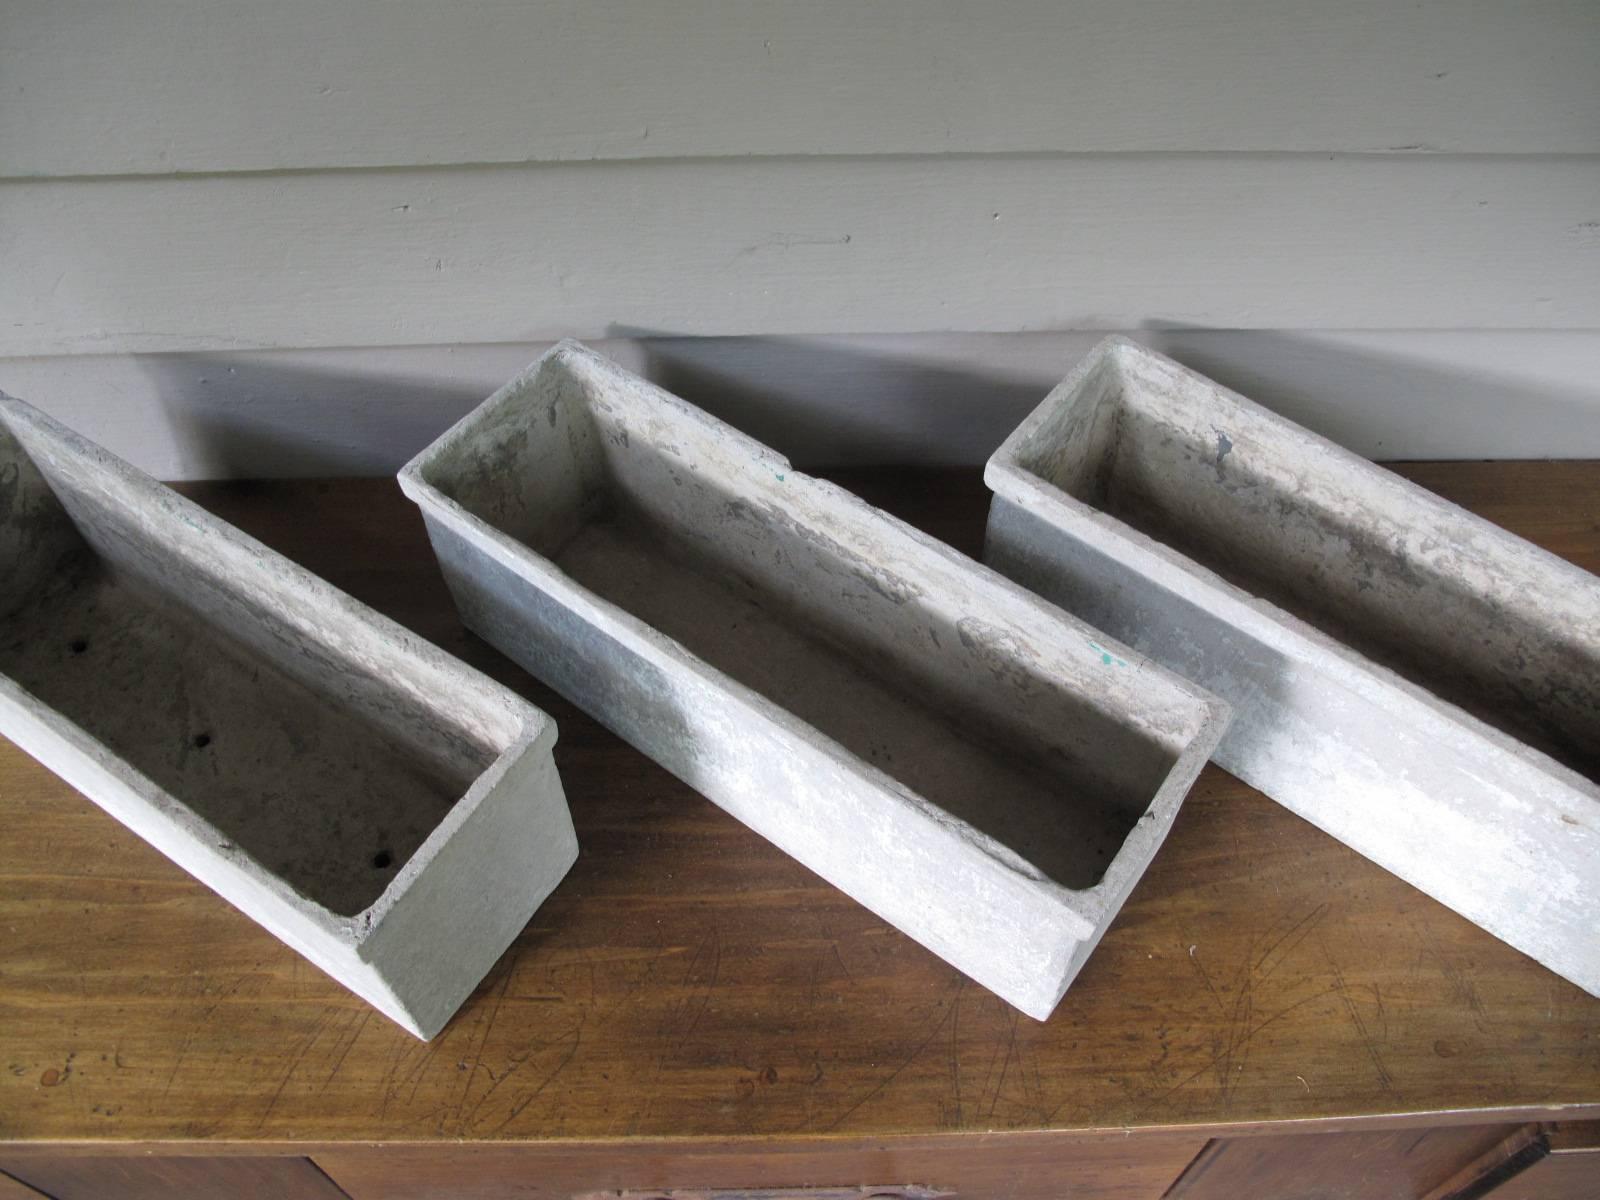 Three fibercrete planters with lip attributed to Swiss designer Willy Guhl. Three drainage holes along bottom of each planter. No apparent makers marks.